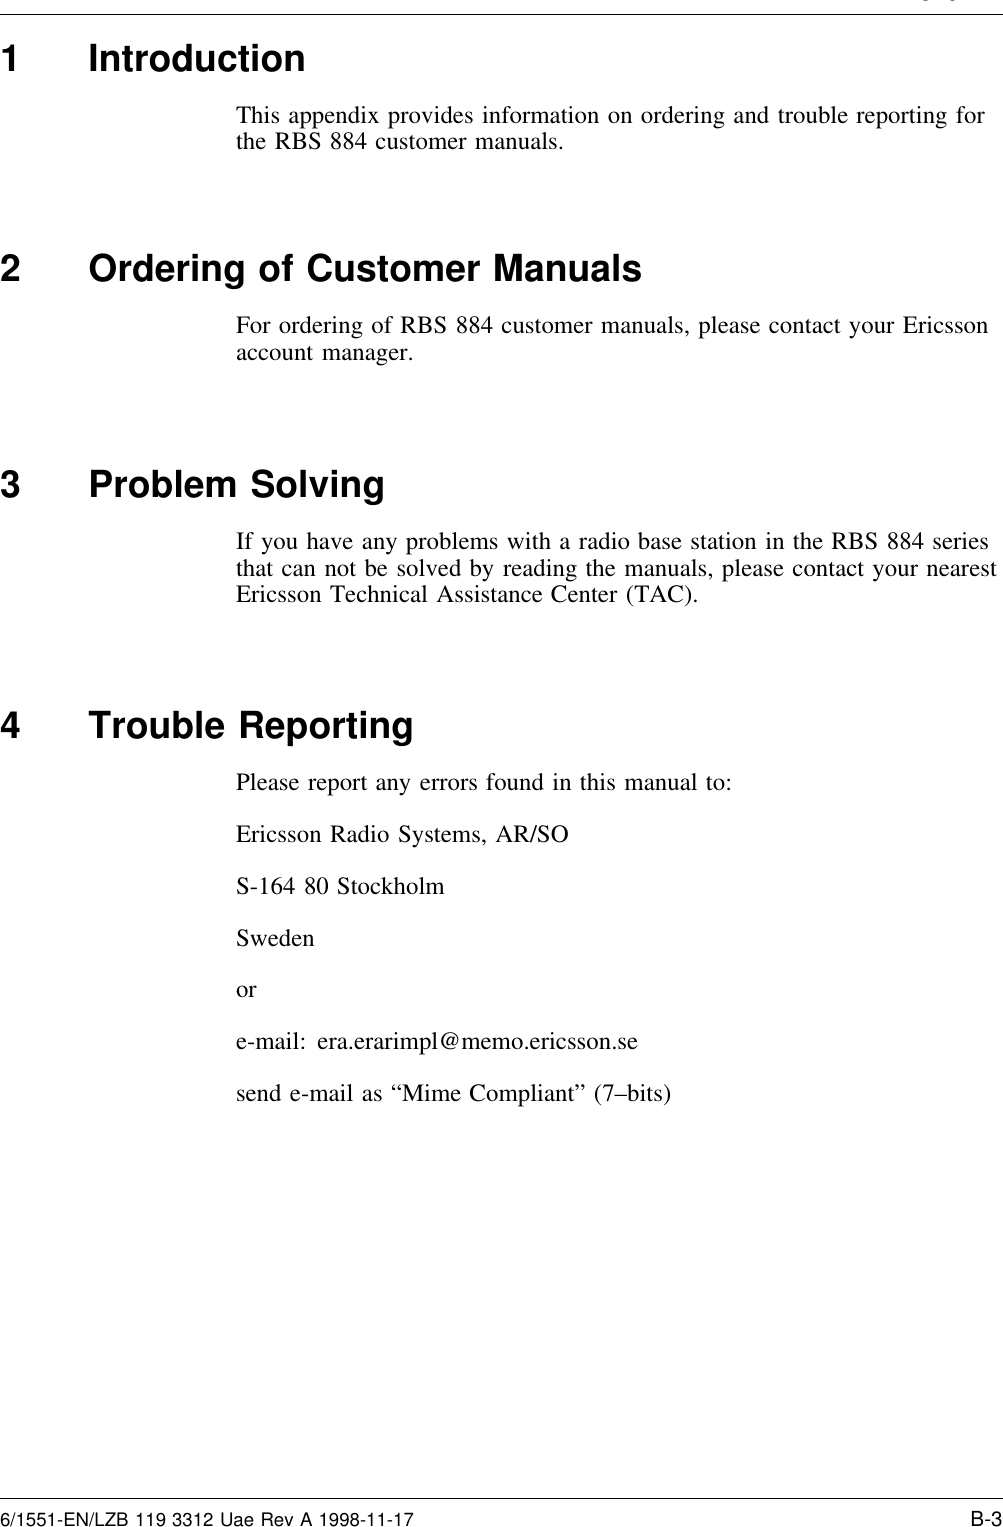 A endix B1 IntroductionThis appendix provides information on ordering and trouble reporting forthe RBS 884 customer manuals.2 Ordering of Customer ManualsFor ordering of RBS 884 customer manuals, please contact your Ericssonaccount manager.3 Problem SolvingIf you have any problems with a radio base station in the RBS 884 seriesthat can not be solved by reading the manuals, please contact your nearestEricsson Technical Assistance Center (TAC).4 Trouble ReportingPlease report any errors found in this manual to:Ericsson Radio Systems, AR/SOS-164 80 StockholmSwedenore-mail: era.erarimpl@memo.ericsson.sesend e-mail as “Mime Compliant” (7–bits)6/1551-EN/LZB 119 3312 Uae Rev A 1998-11-17 B-3